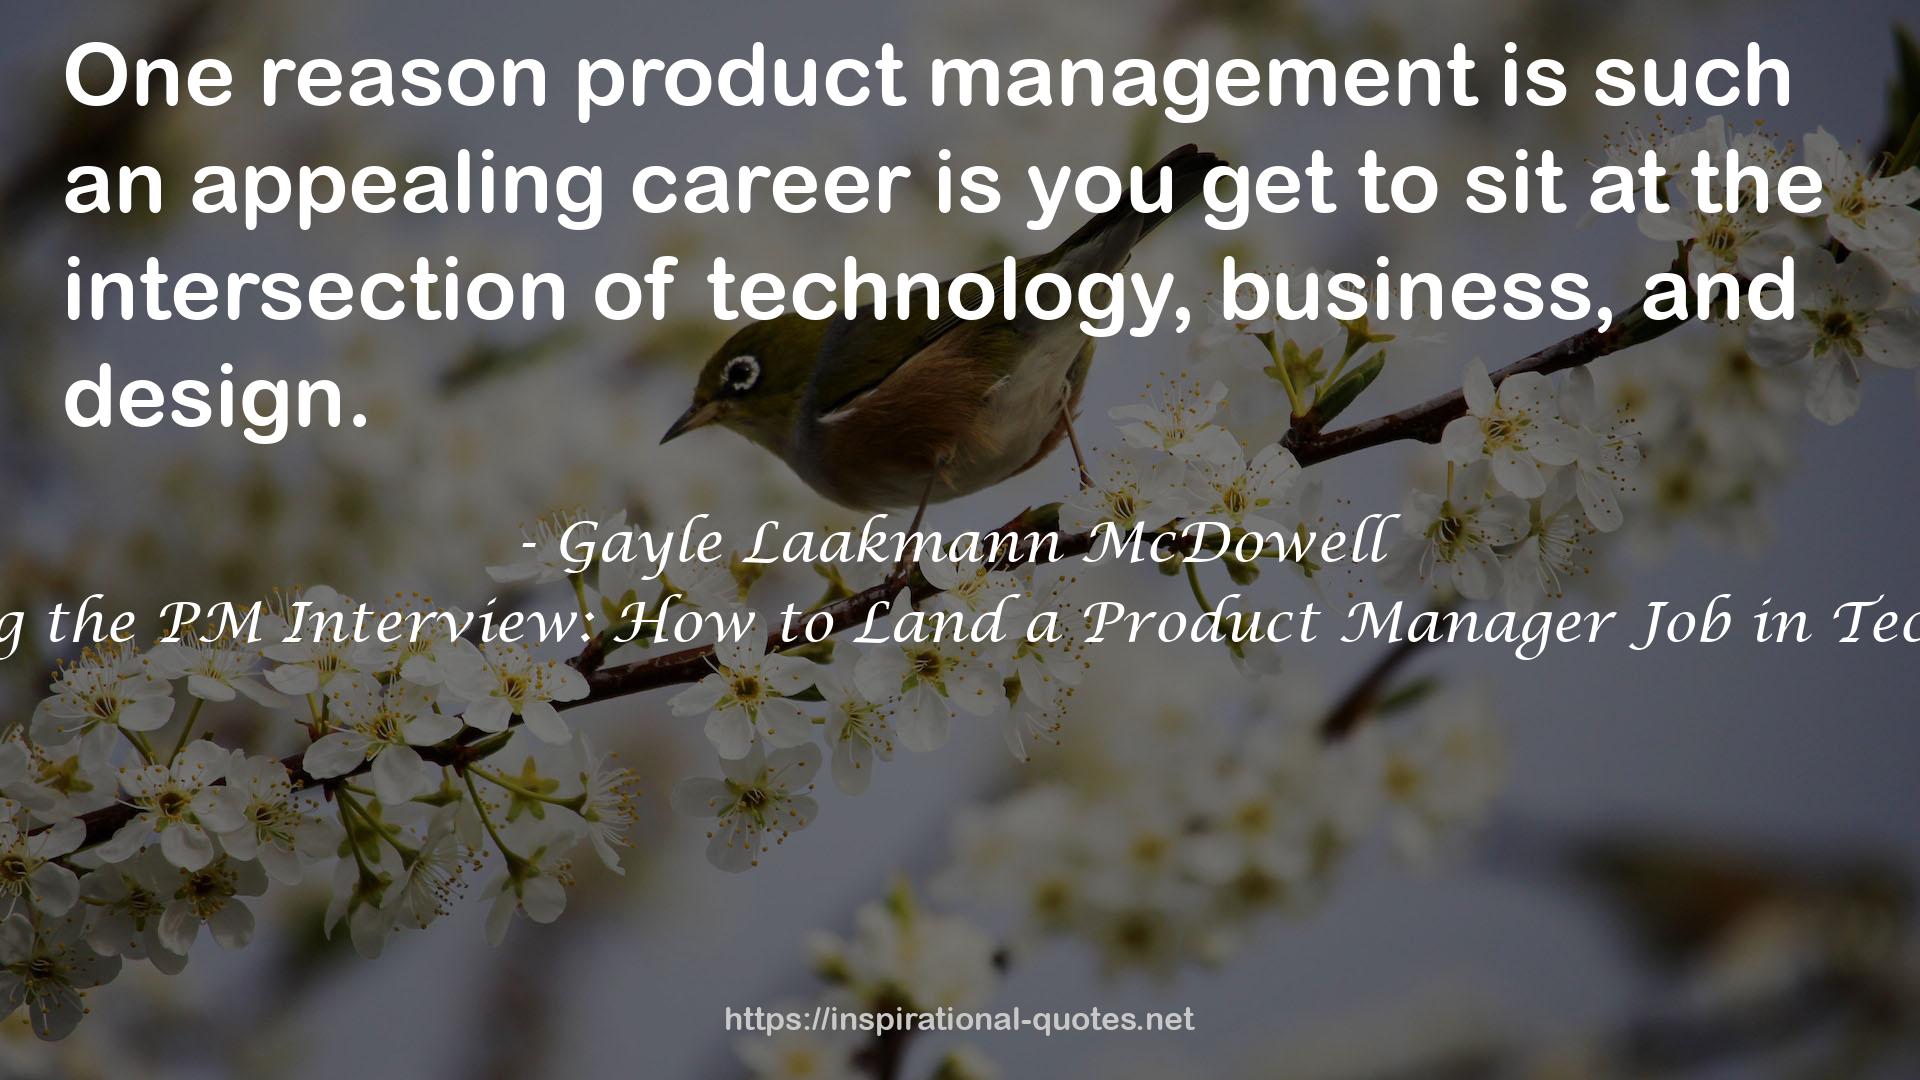 Cracking the PM Interview: How to Land a Product Manager Job in Technology QUOTES